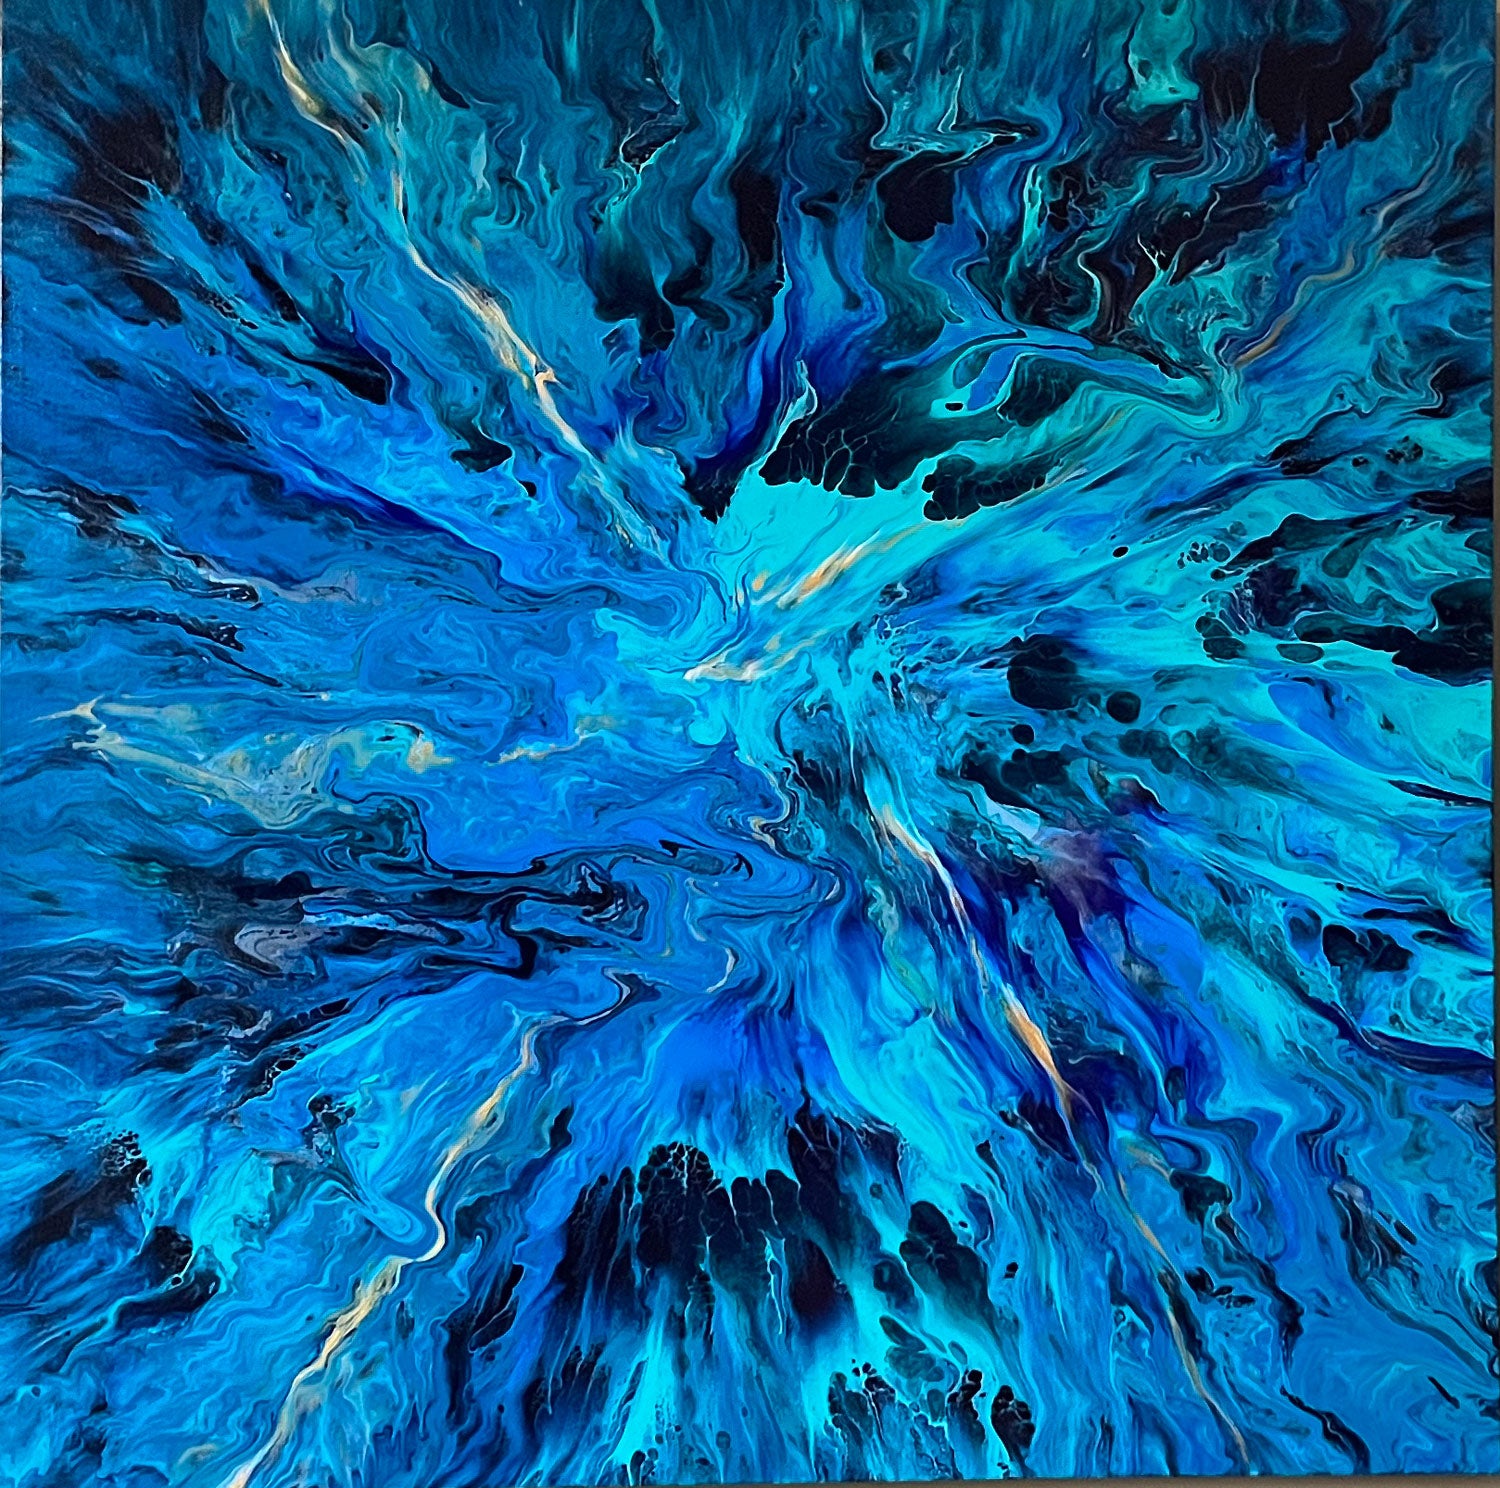 3 foot by 3 foot abstract water painting that feels like diving deep into the ocean. Abstract art with blues.